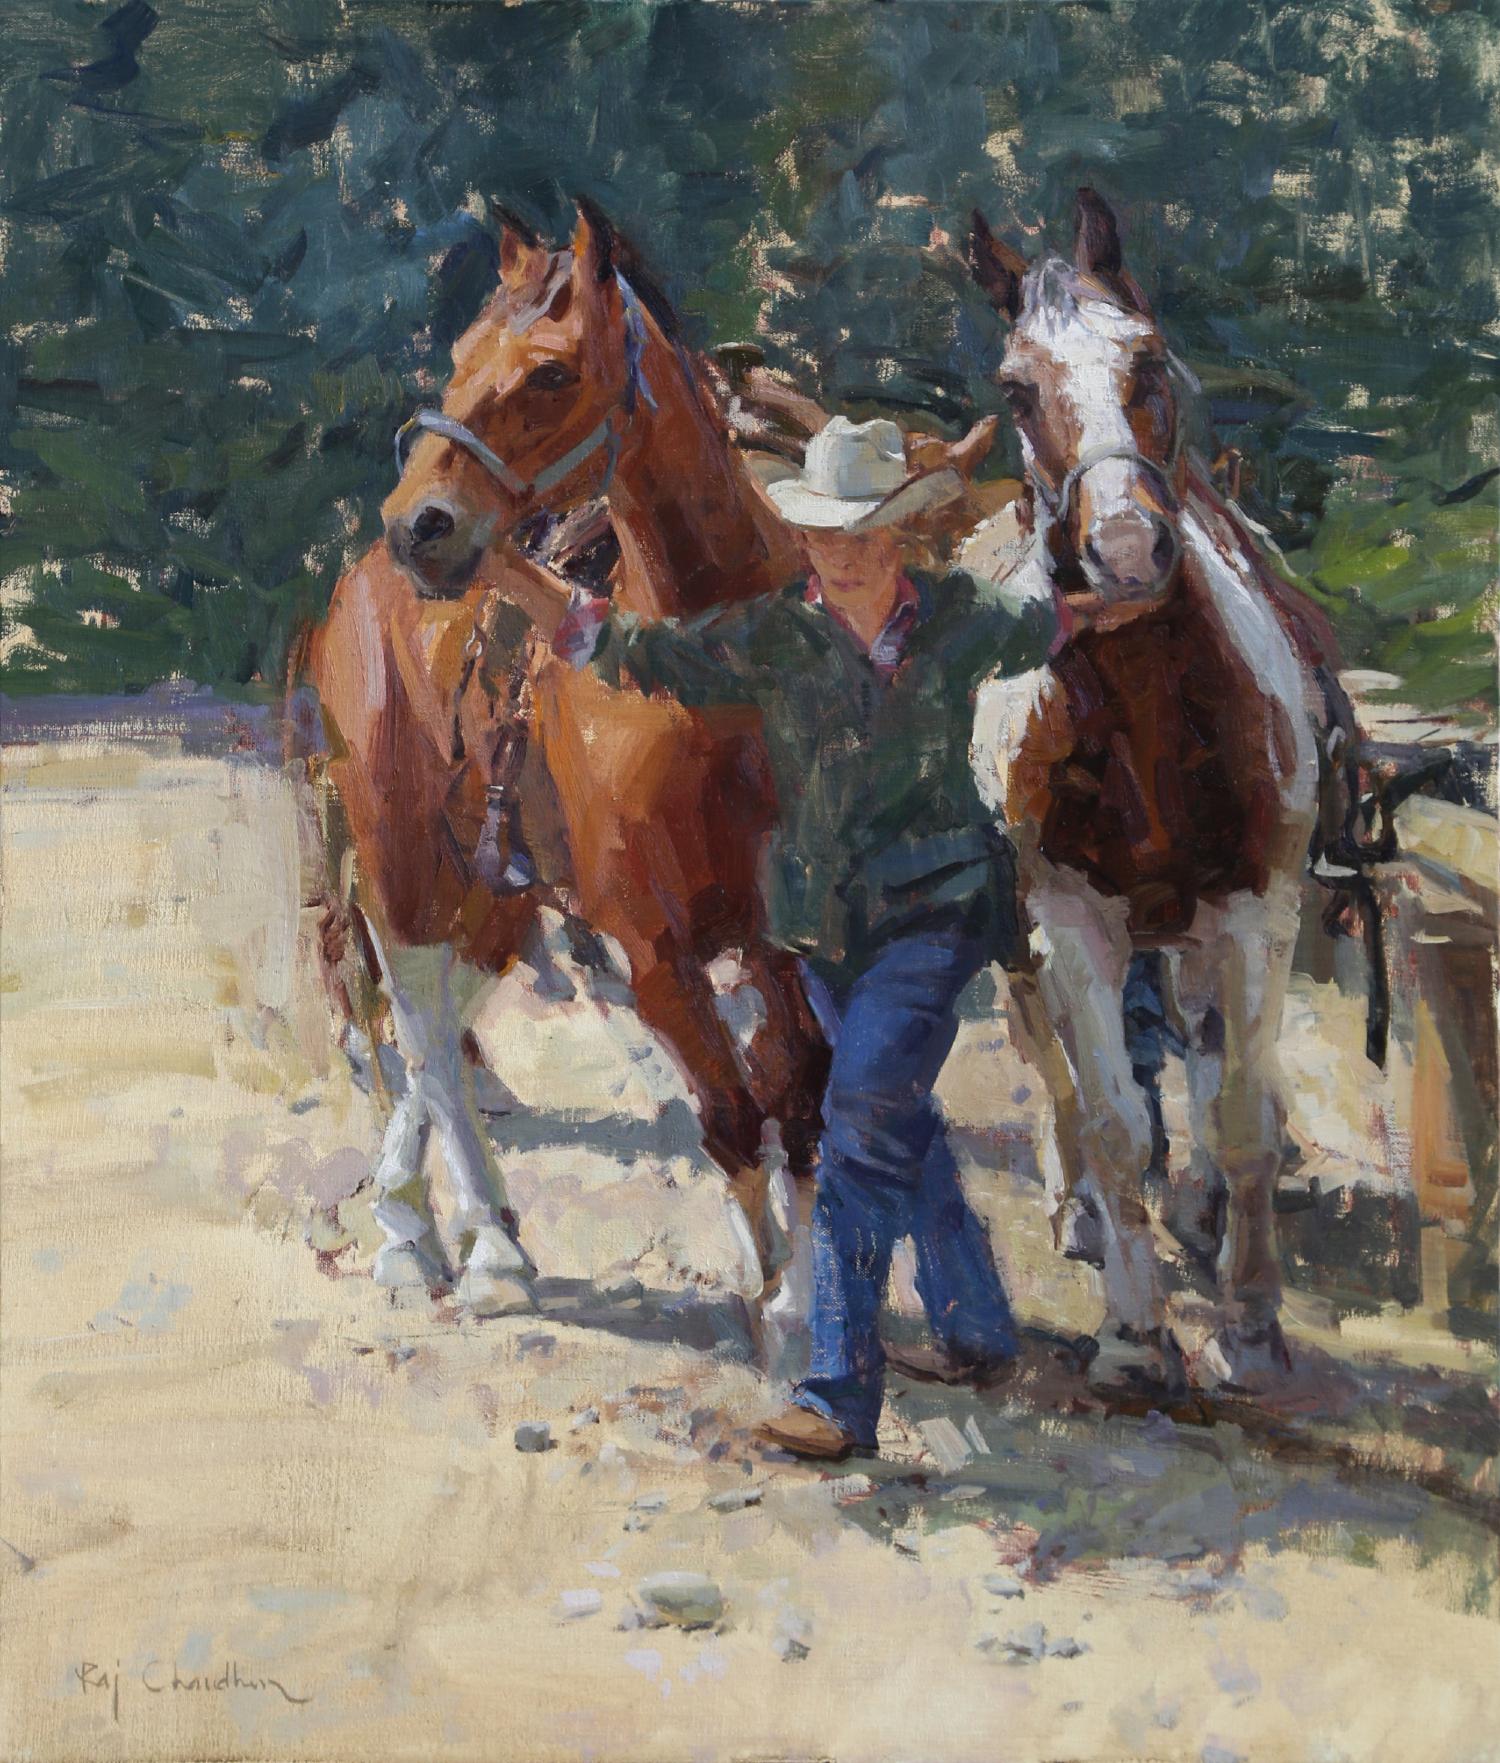 Lead Wrangler, Oil on Linen, American Impressionistic Style, Western, Southwest